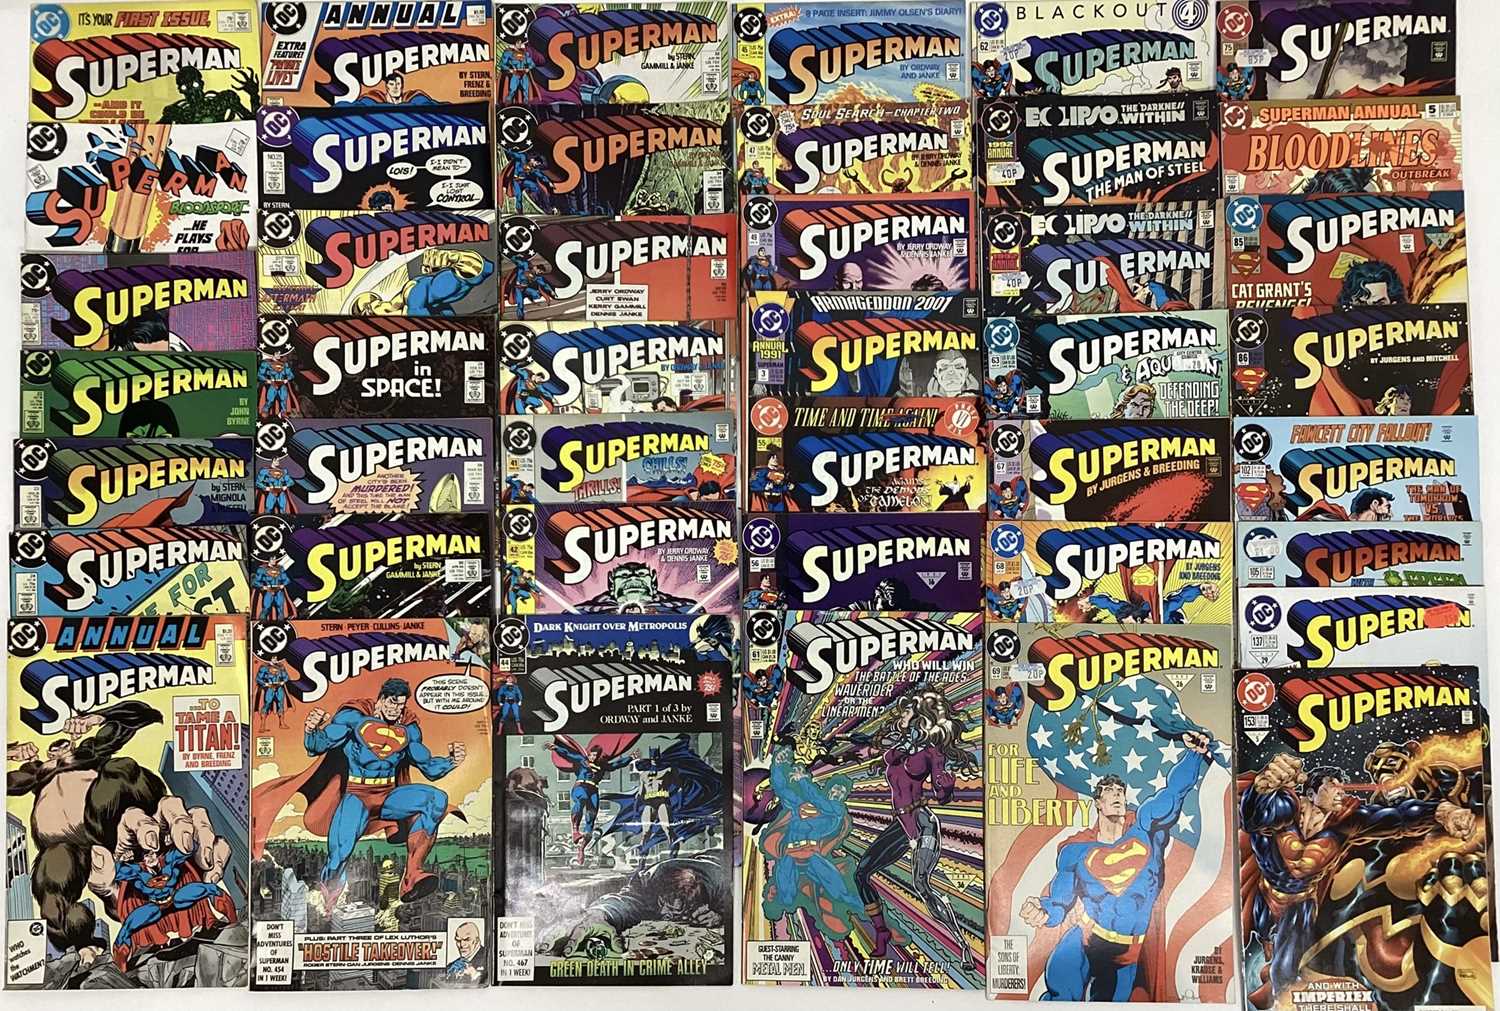 Large quantity of 1980's and 90's DC Comics, Superman to include #1, #4 1st appearance of Bloodsport